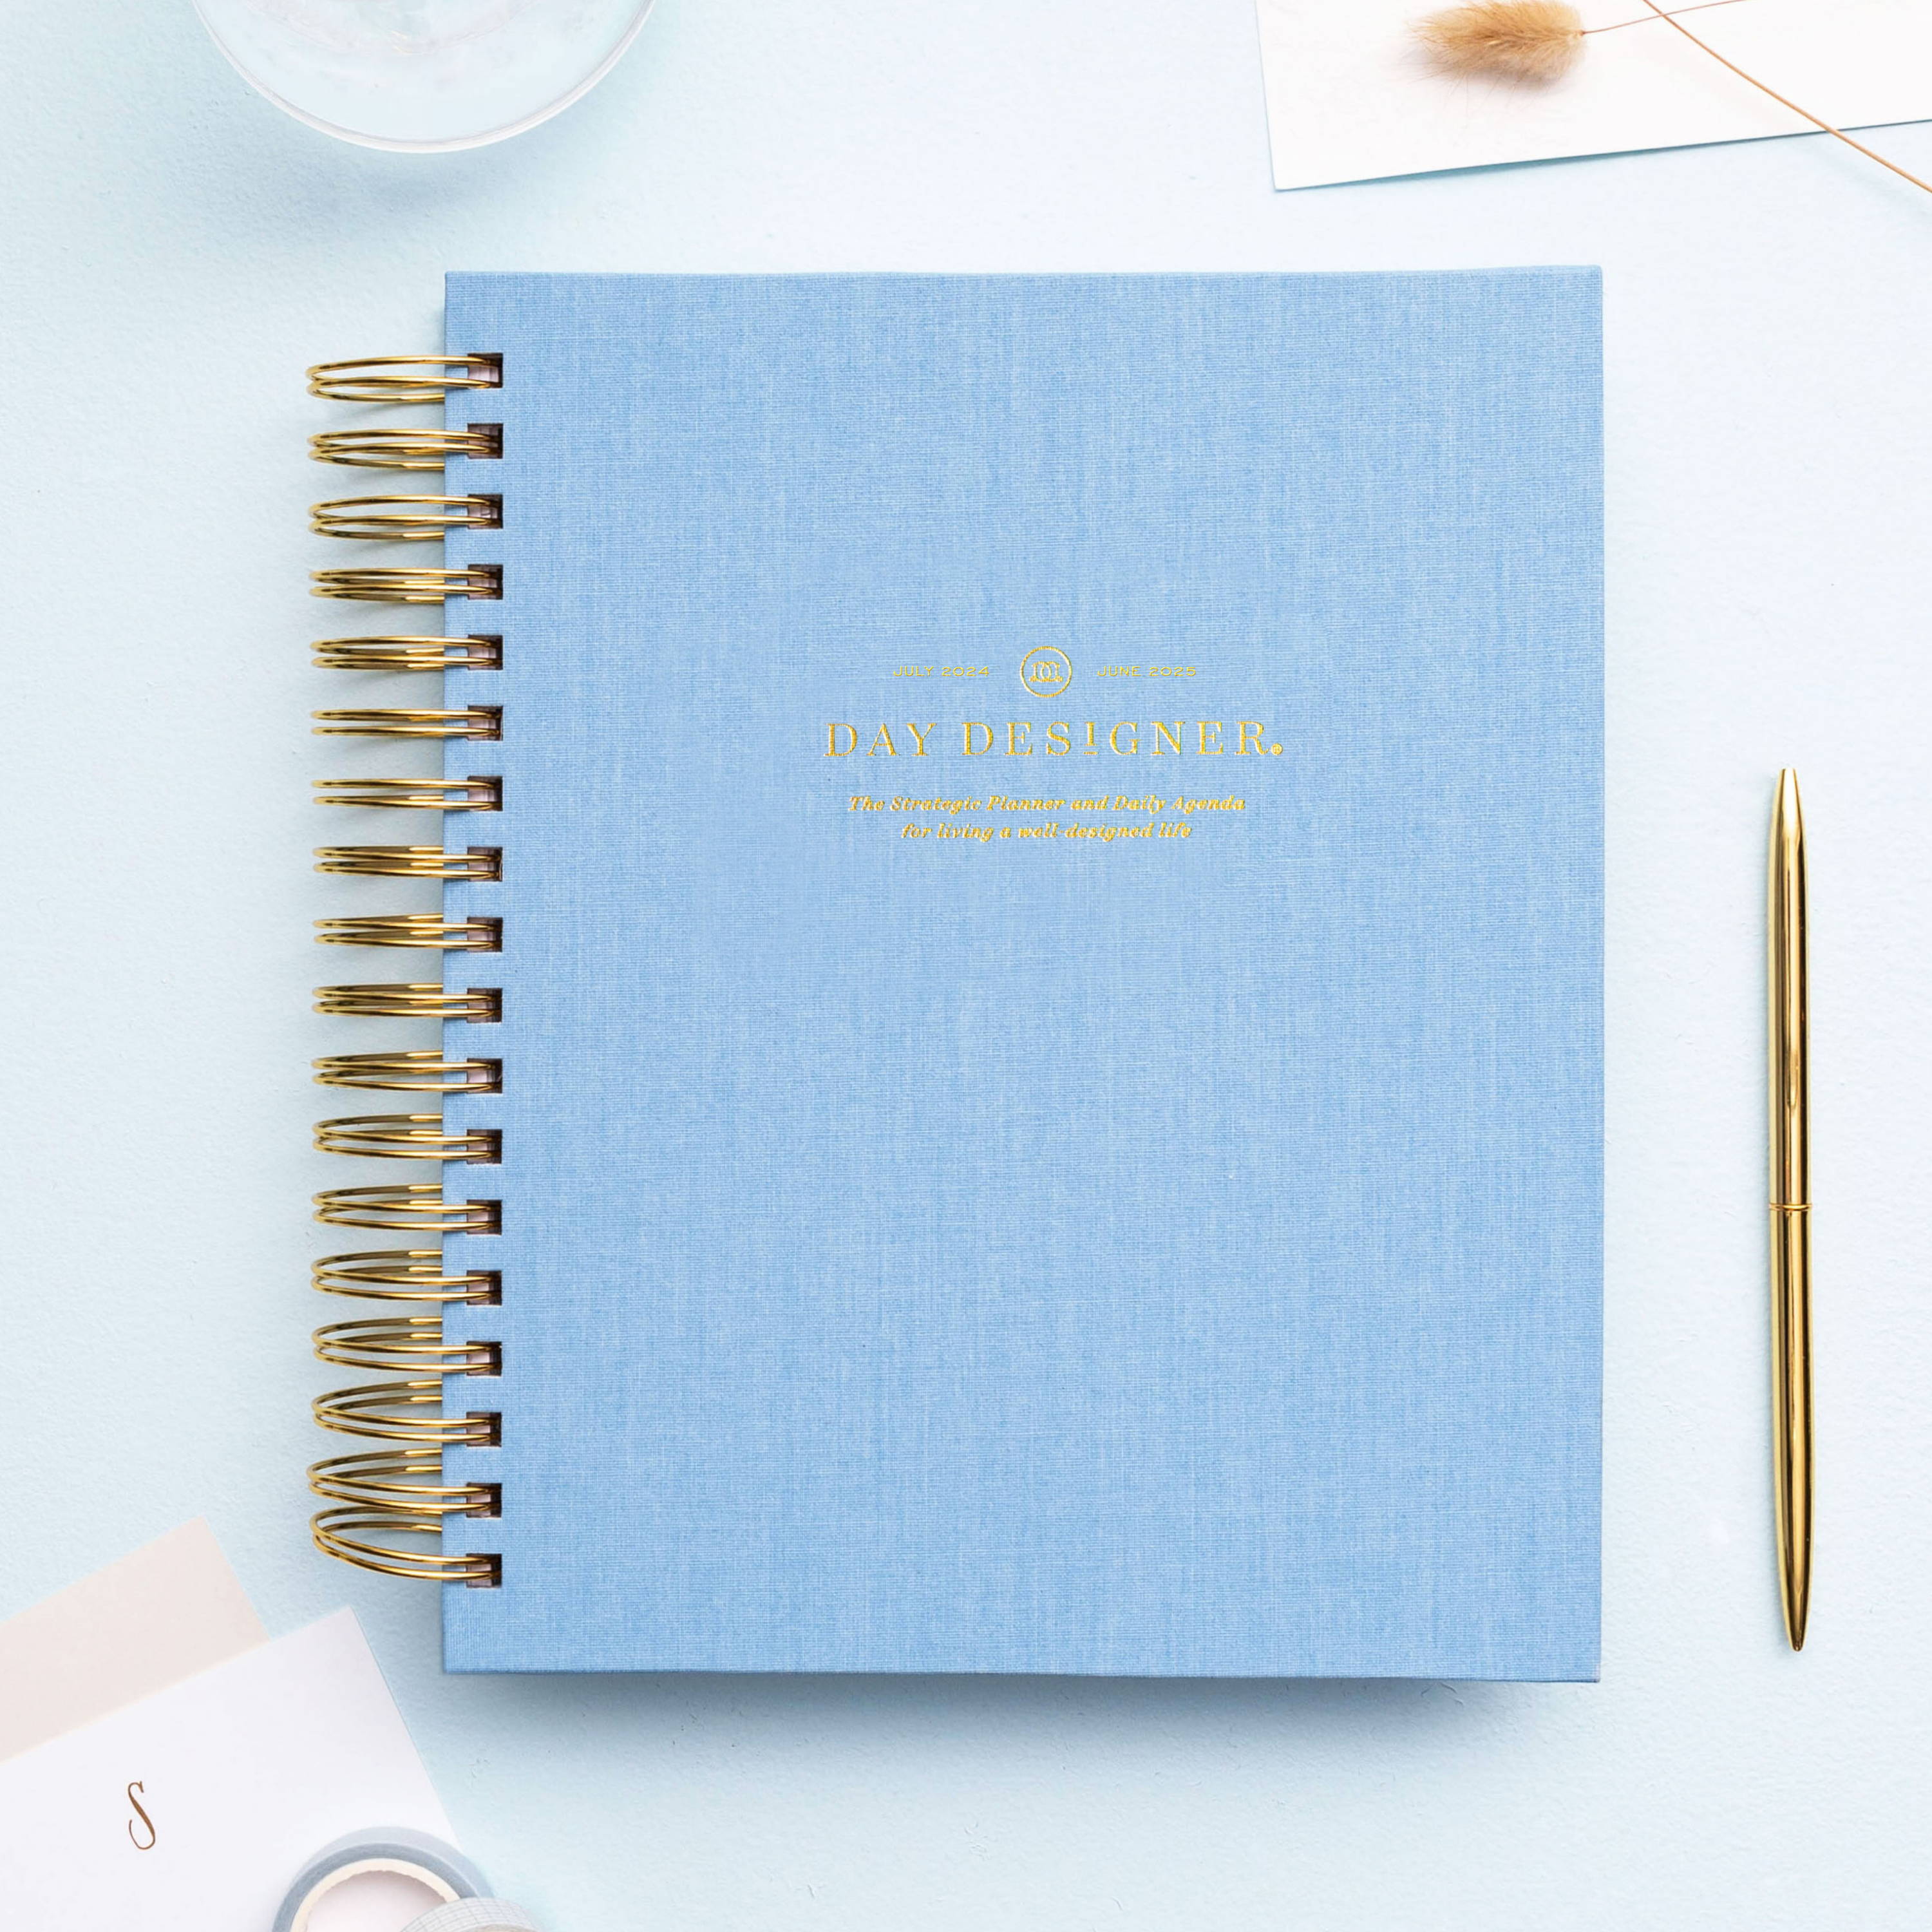 light blue closed book bookcloth planner on light blue background